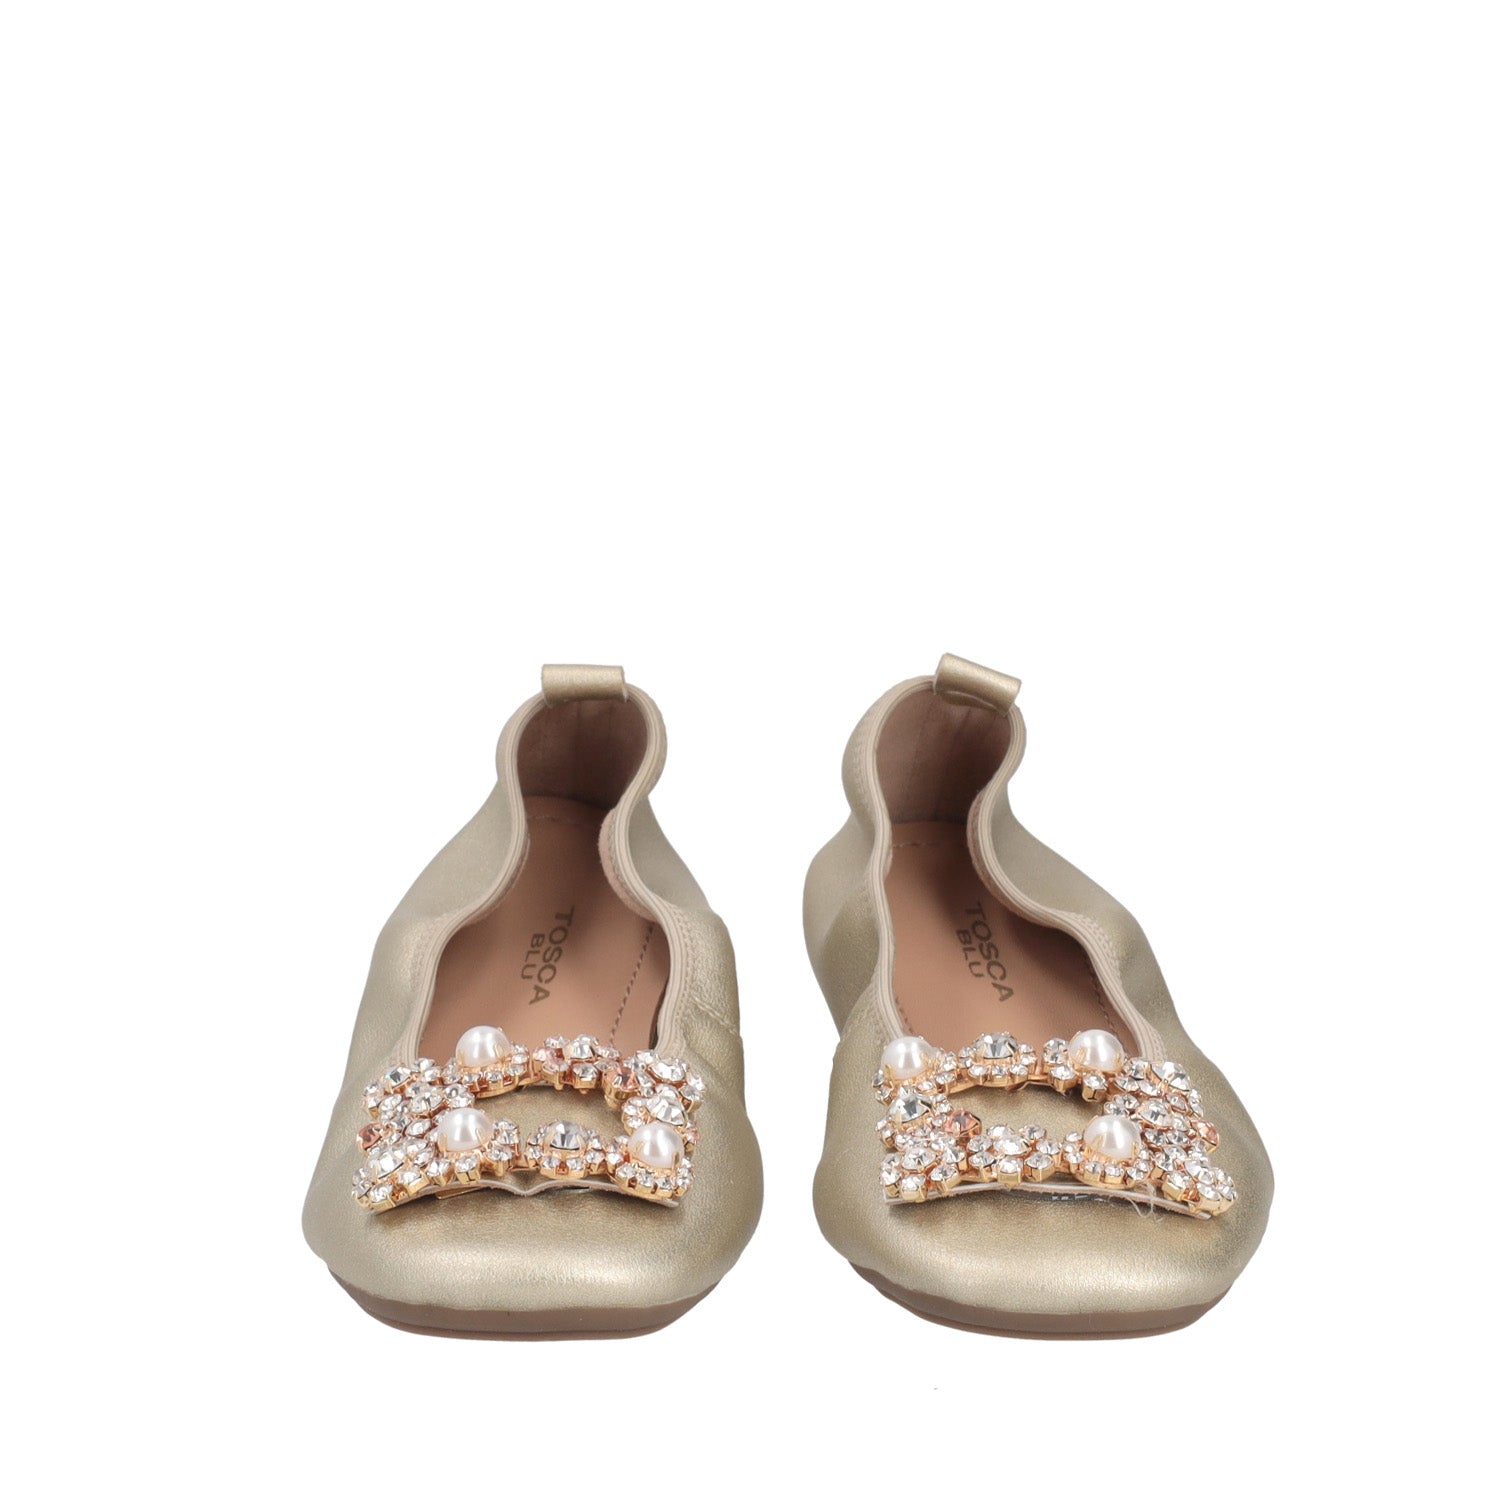 GOLD BETTY BALLERINA SHOES WITH JEWEL ACCESSORY